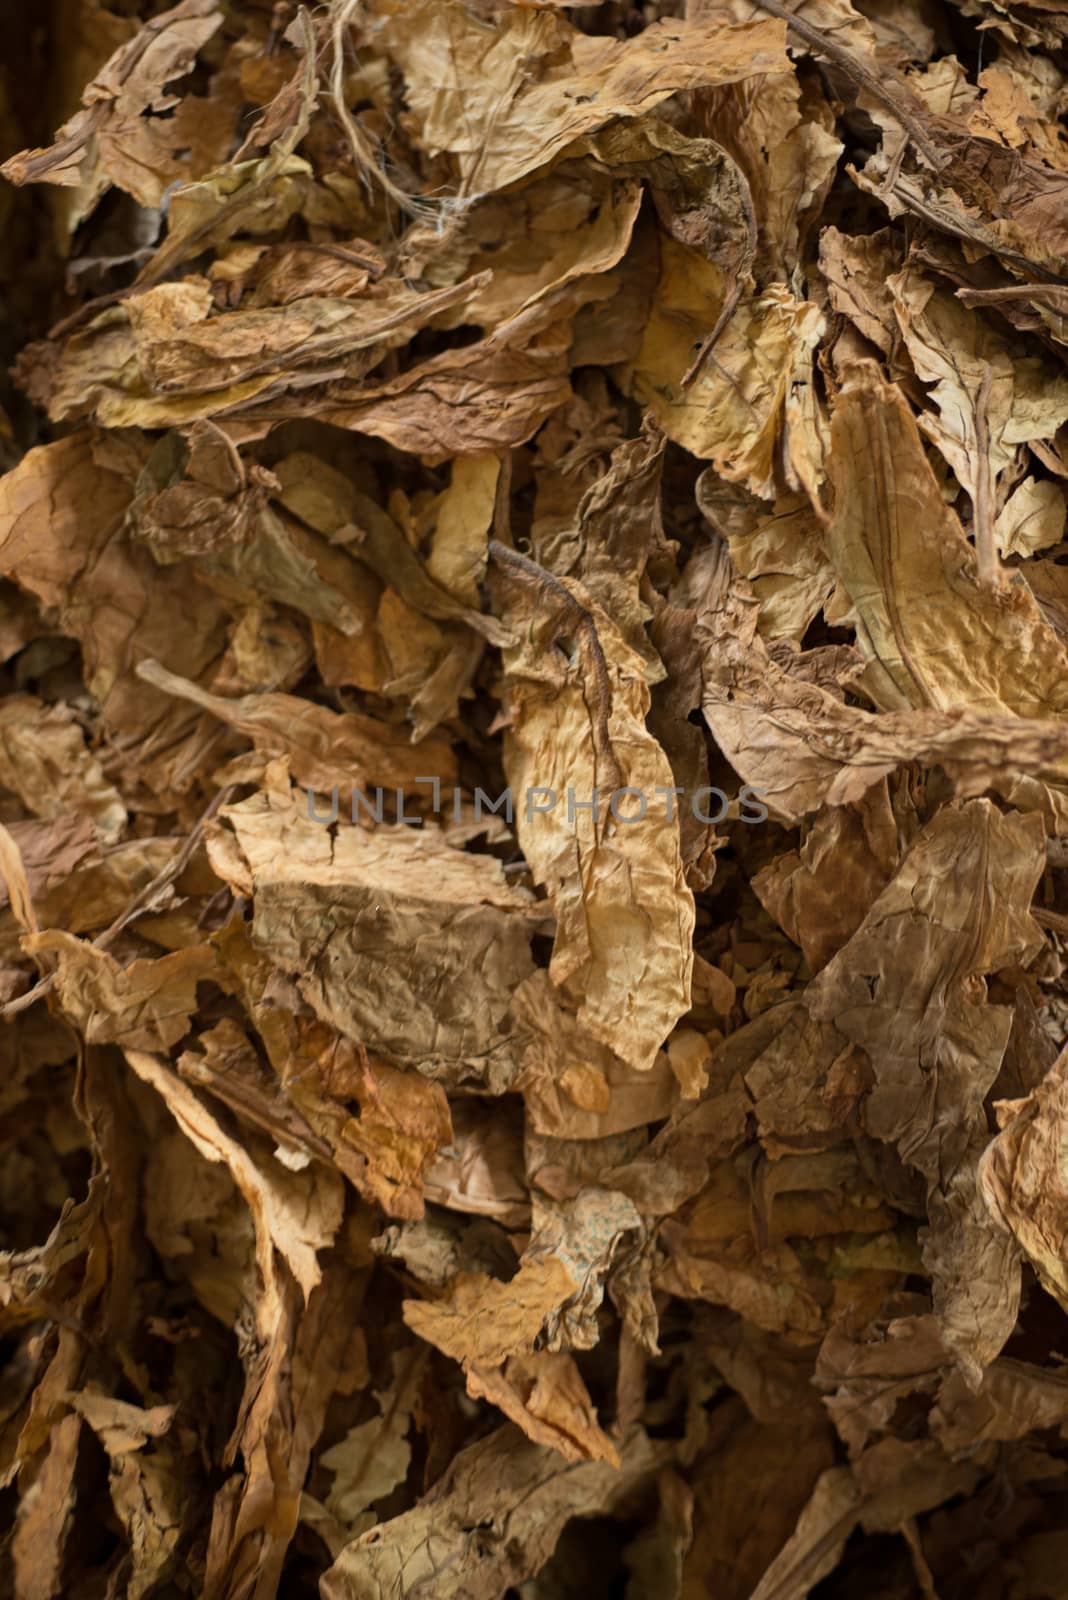 Bulk tobacco being mixed in a cigarette factory for cigarettes production